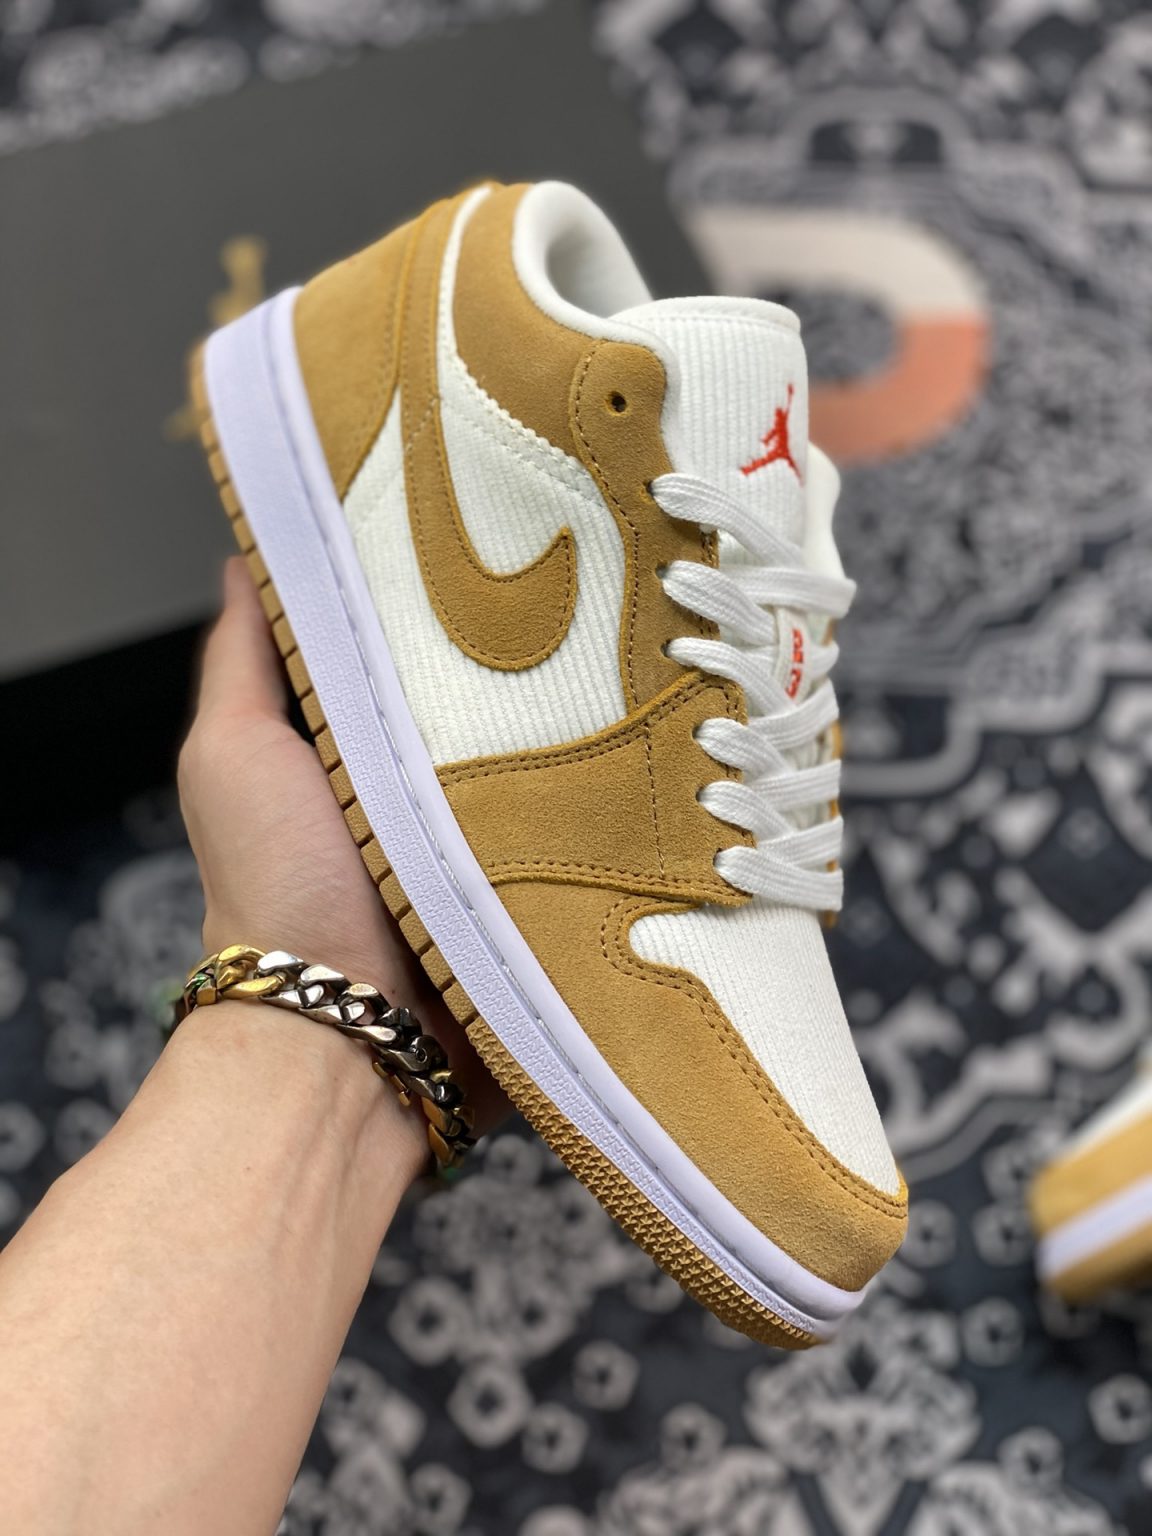 Air Jordan 1 Low Corduroy and Suede DH7820-700 For Sale – Sneaker Hello